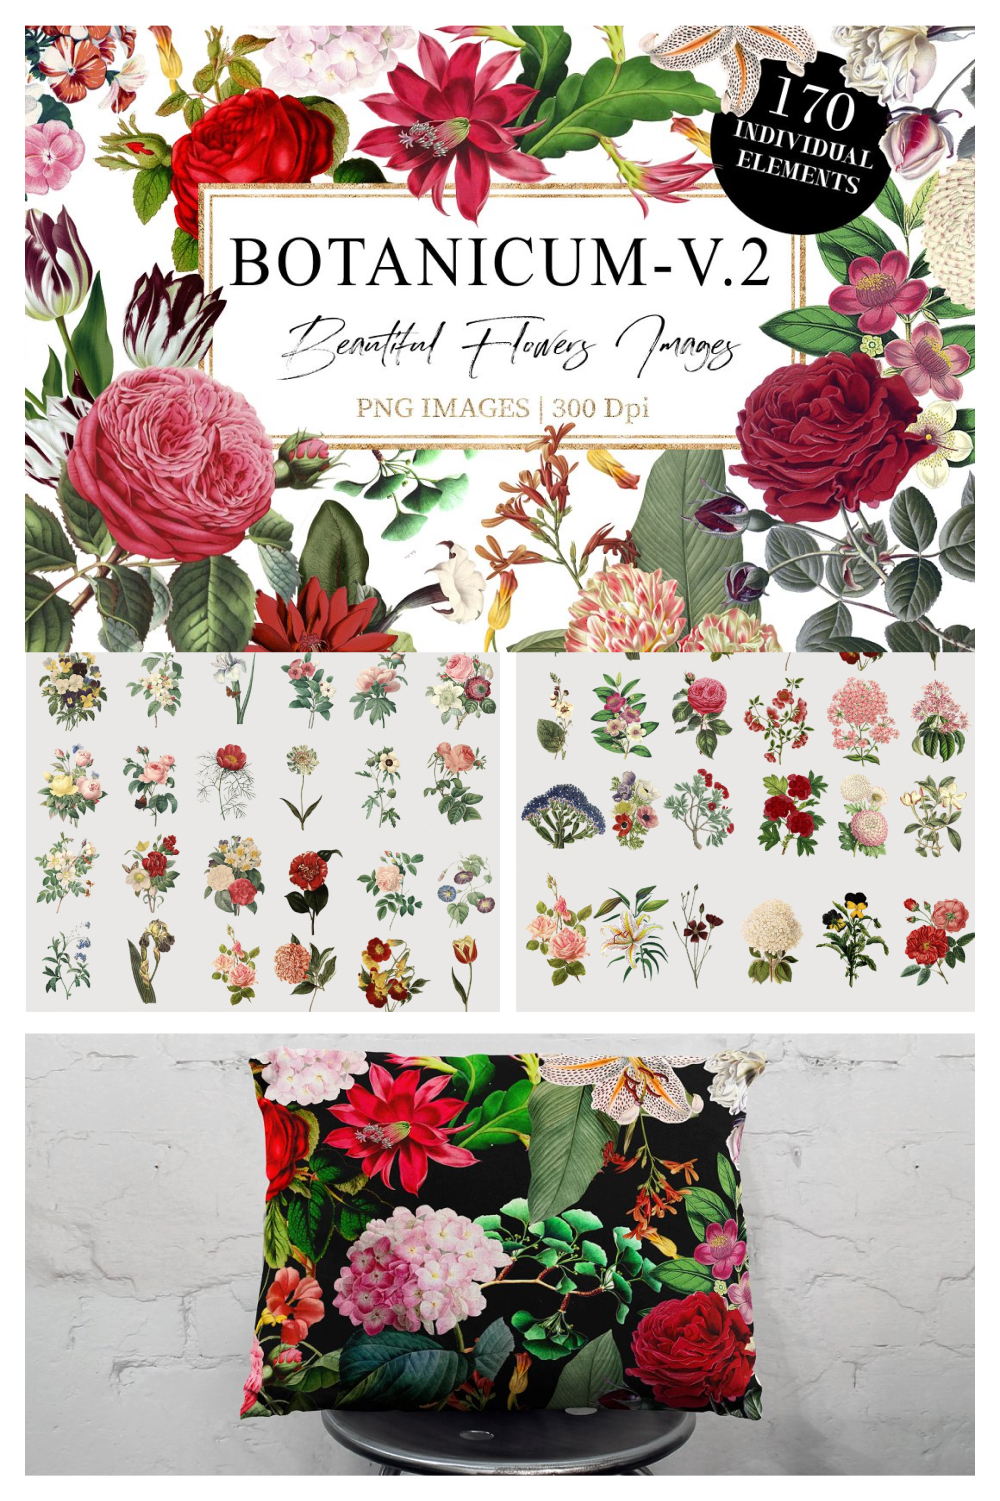 Pictures on the theme of botany are depicted.